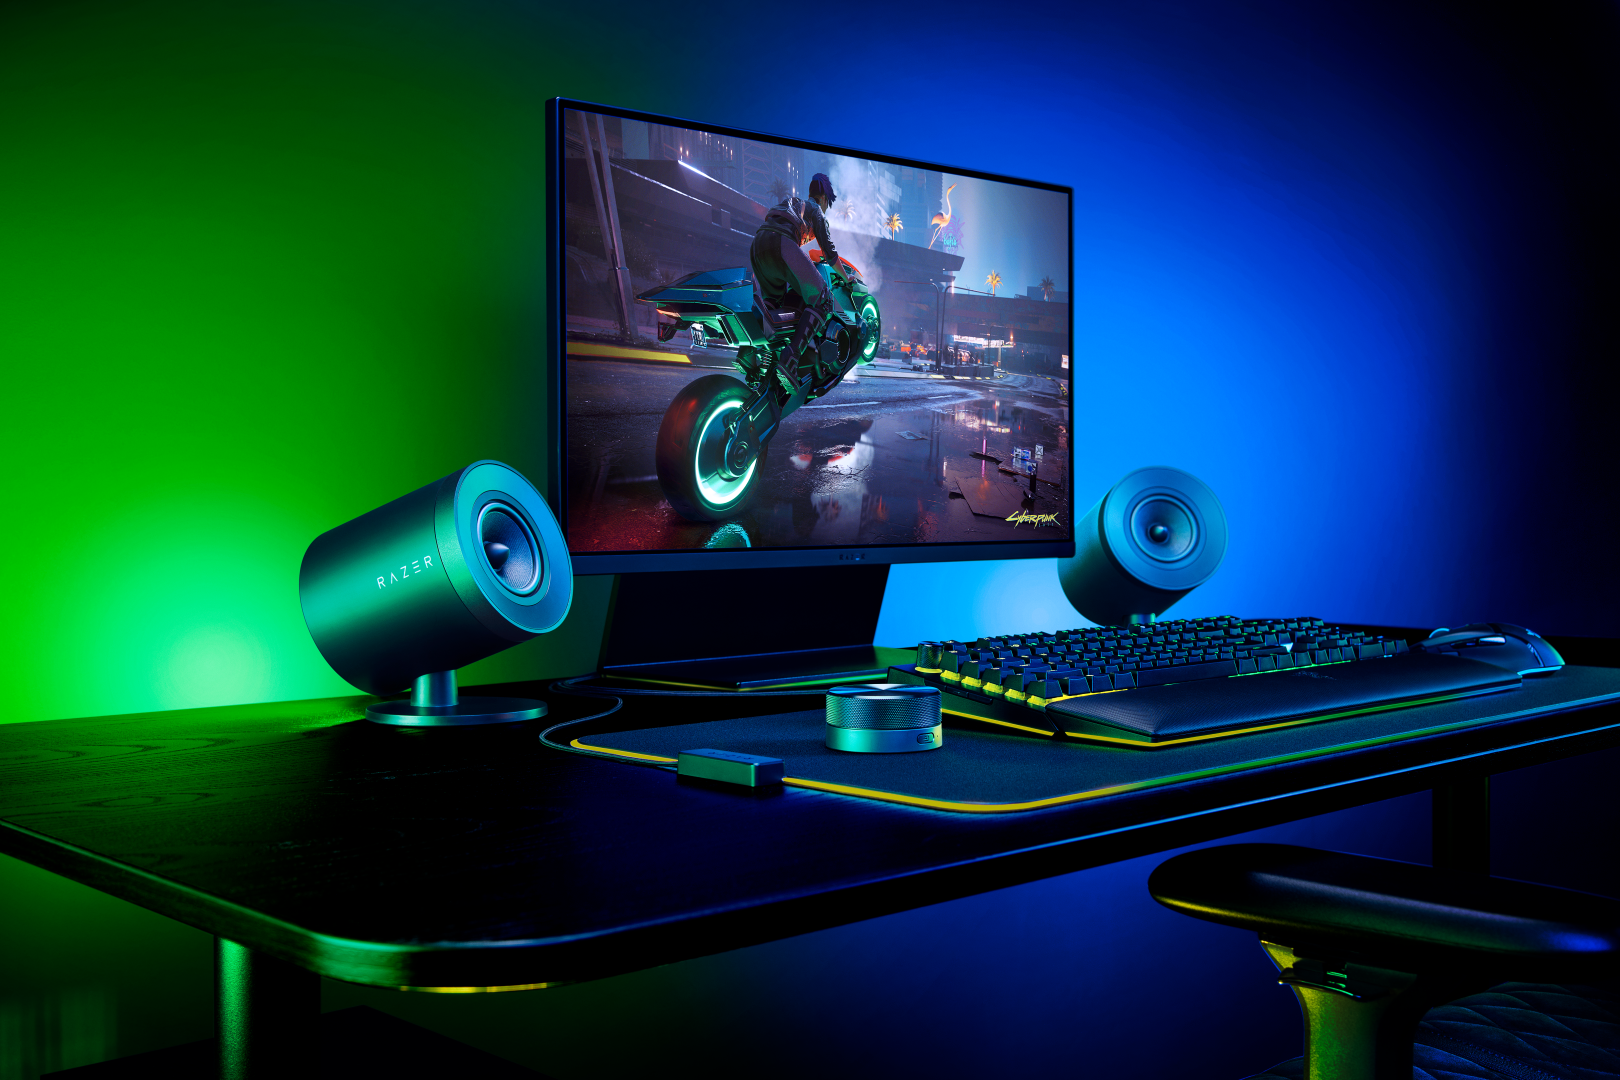 Glow-up your setup with the upcoming Razer Nommo V2 rear